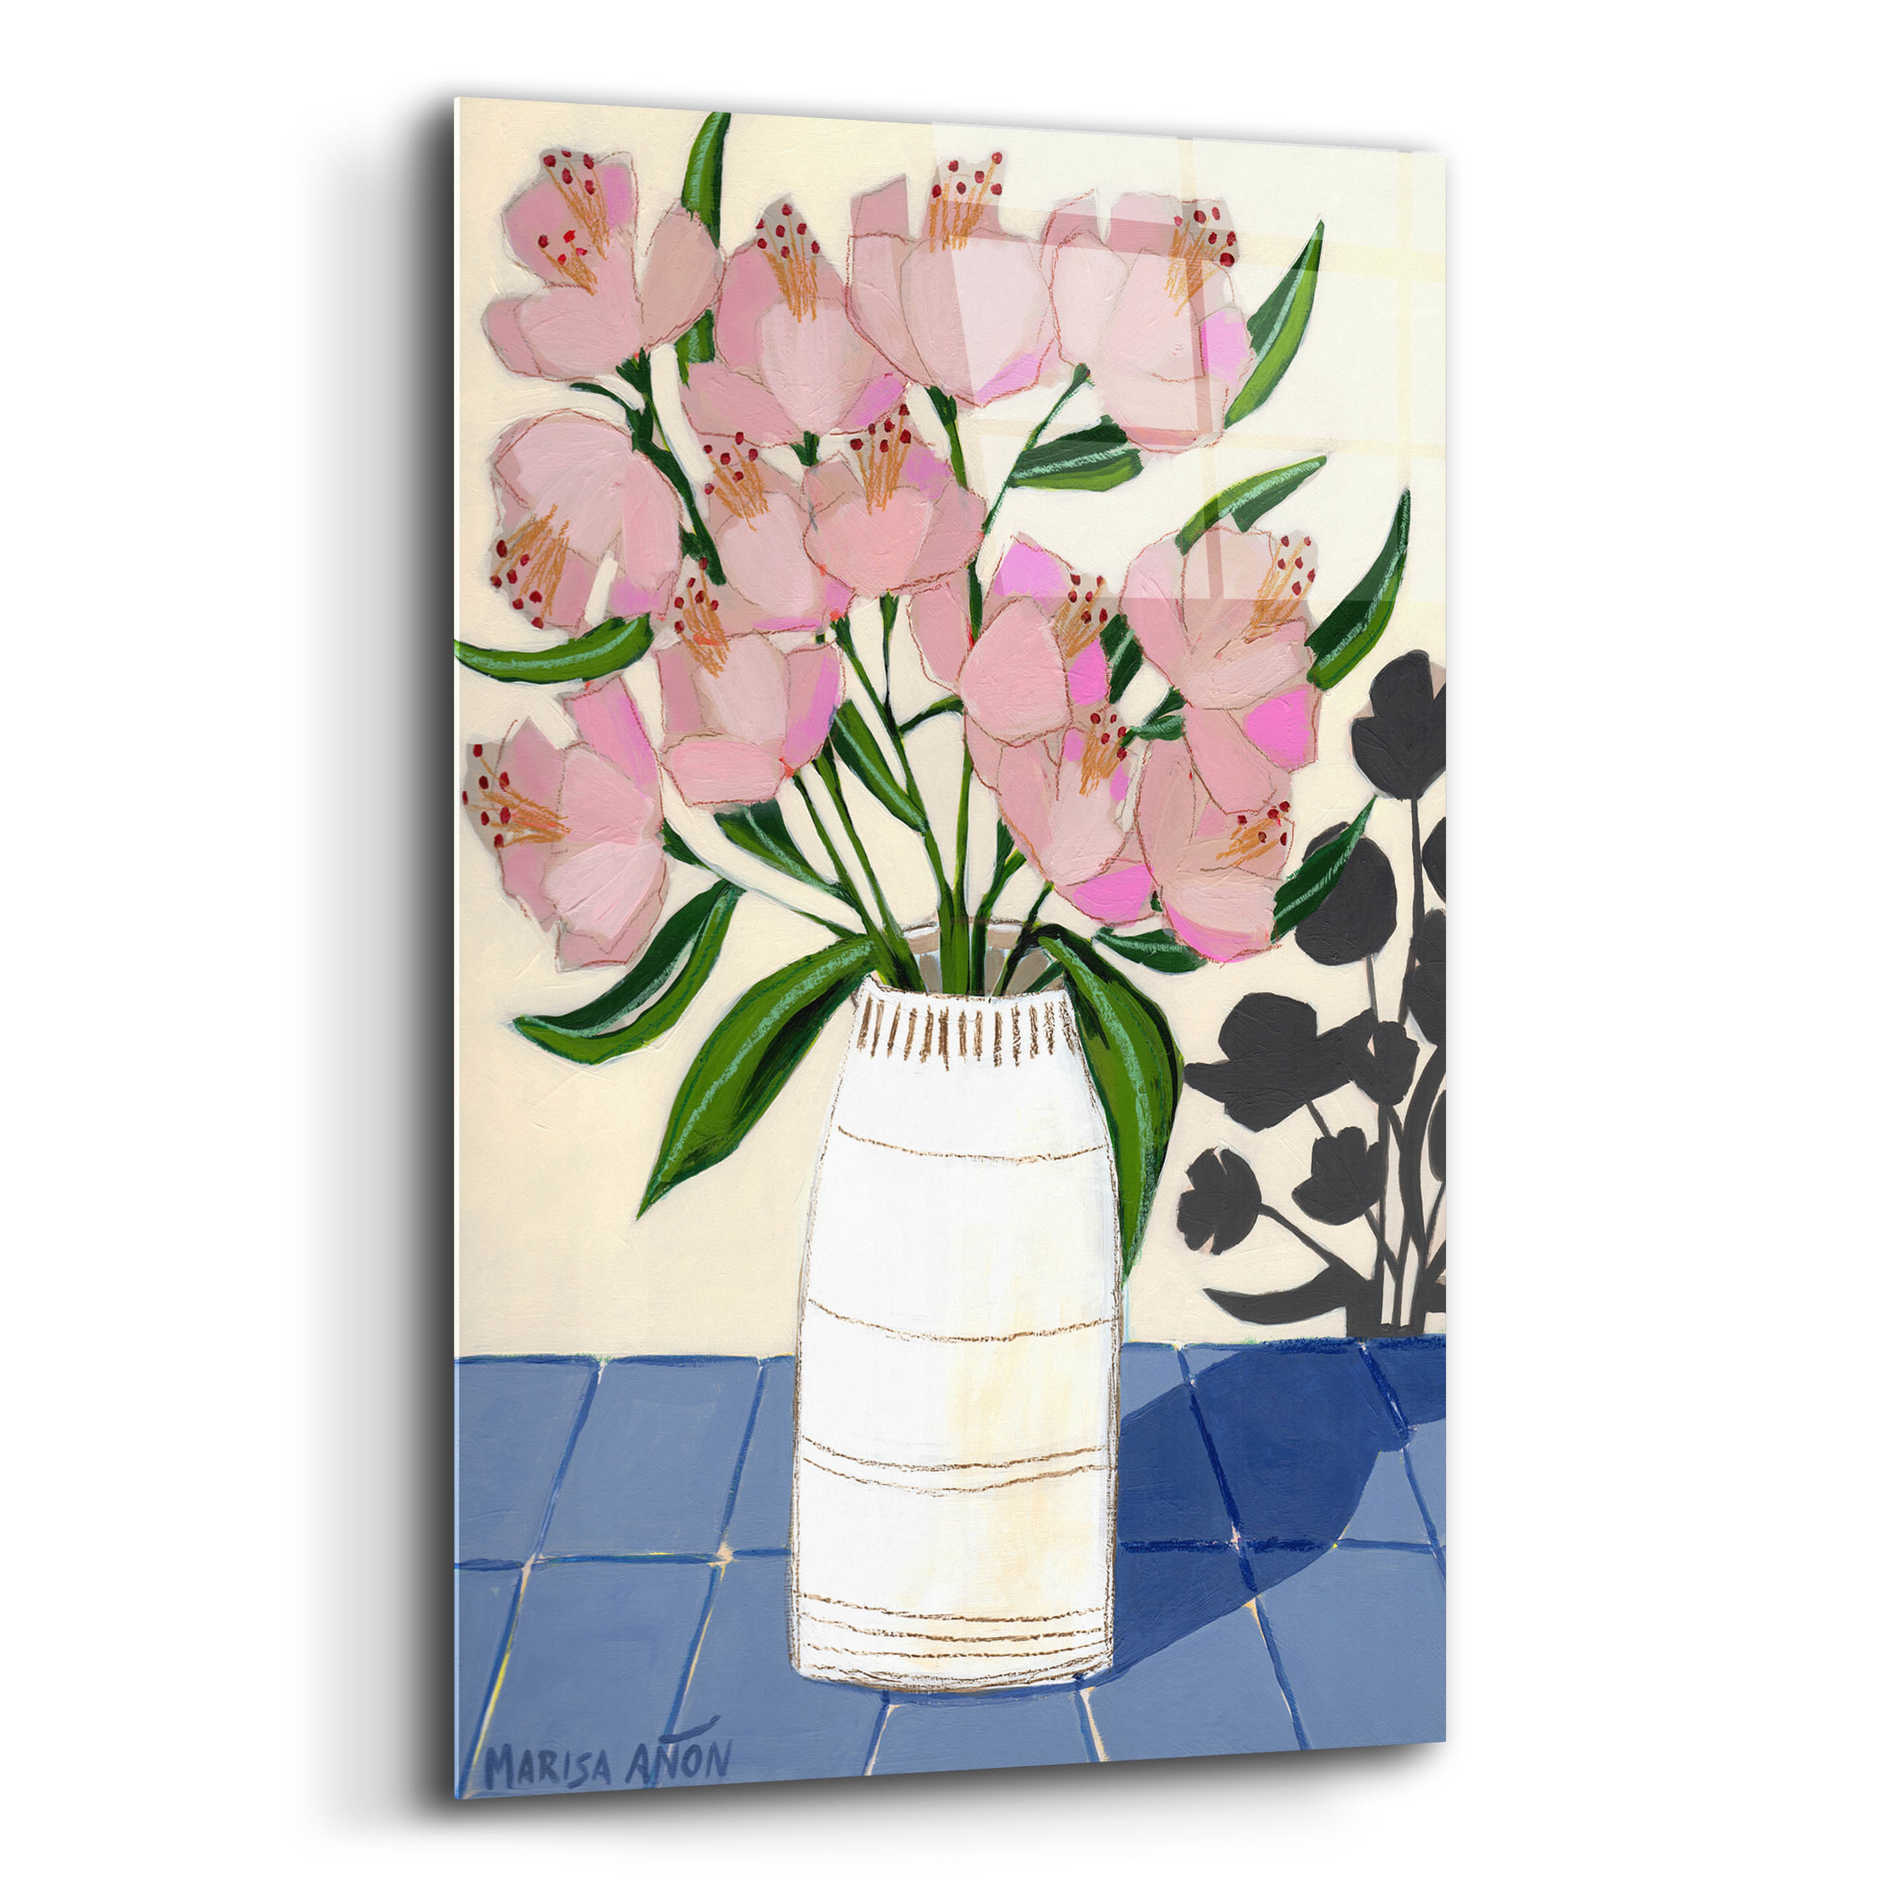 Epic Art 'Spring Florals 5' by Marisa Anon, Acrylic Glass Wall Art,12x16